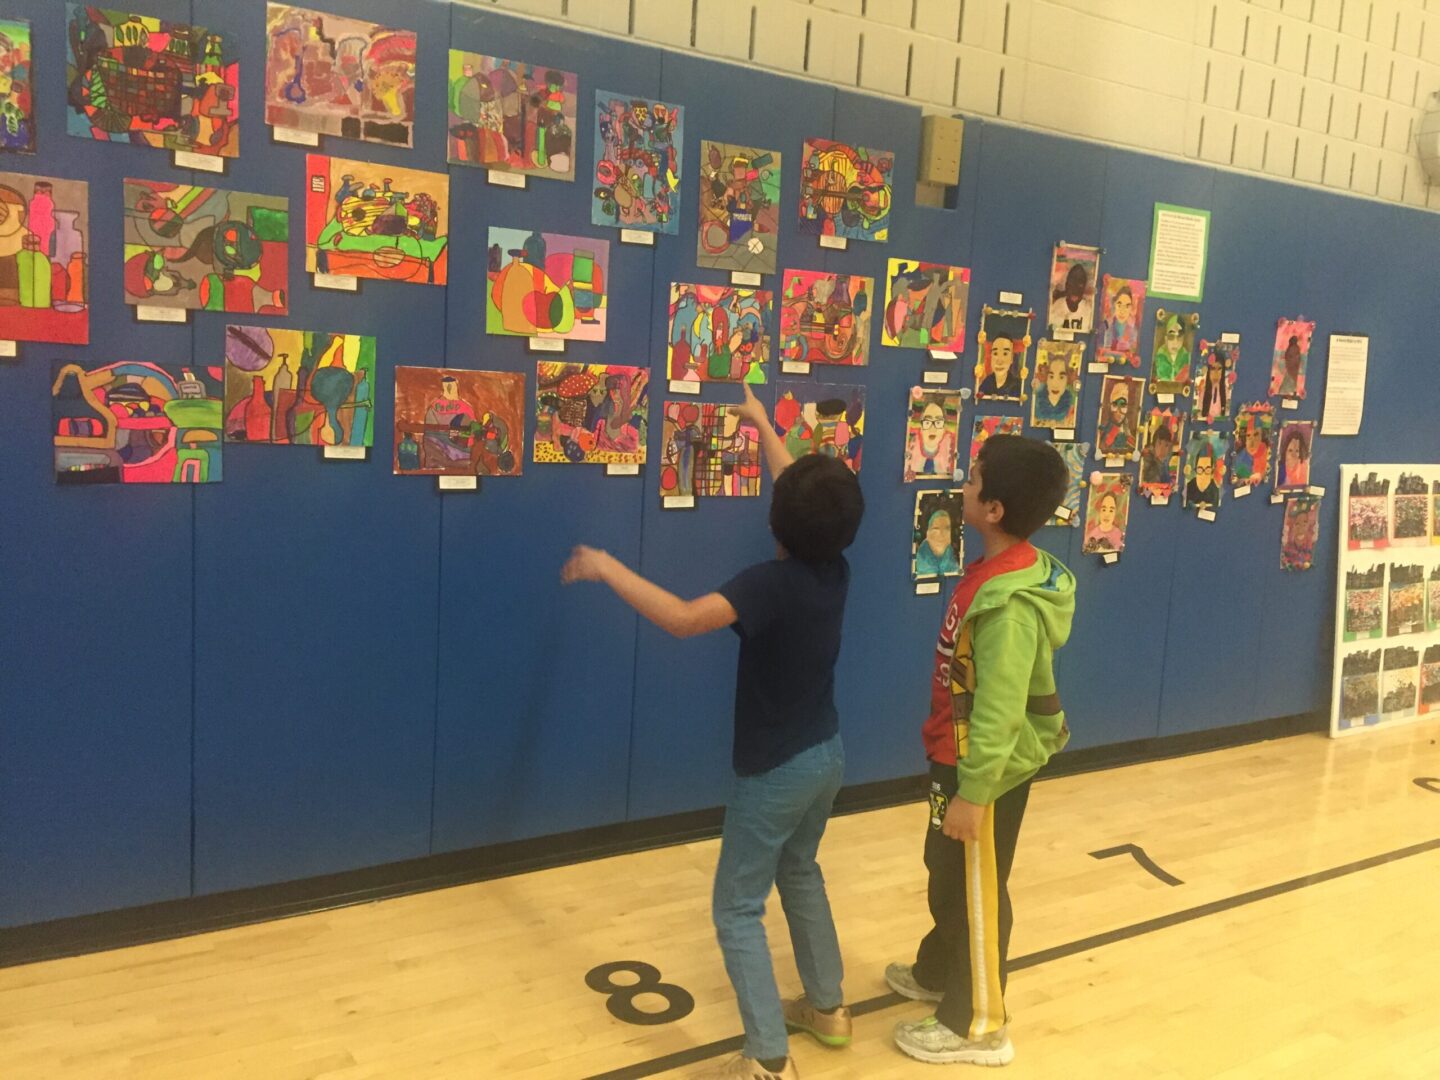 Two children looking at artwork on a wall in a gymnasium.